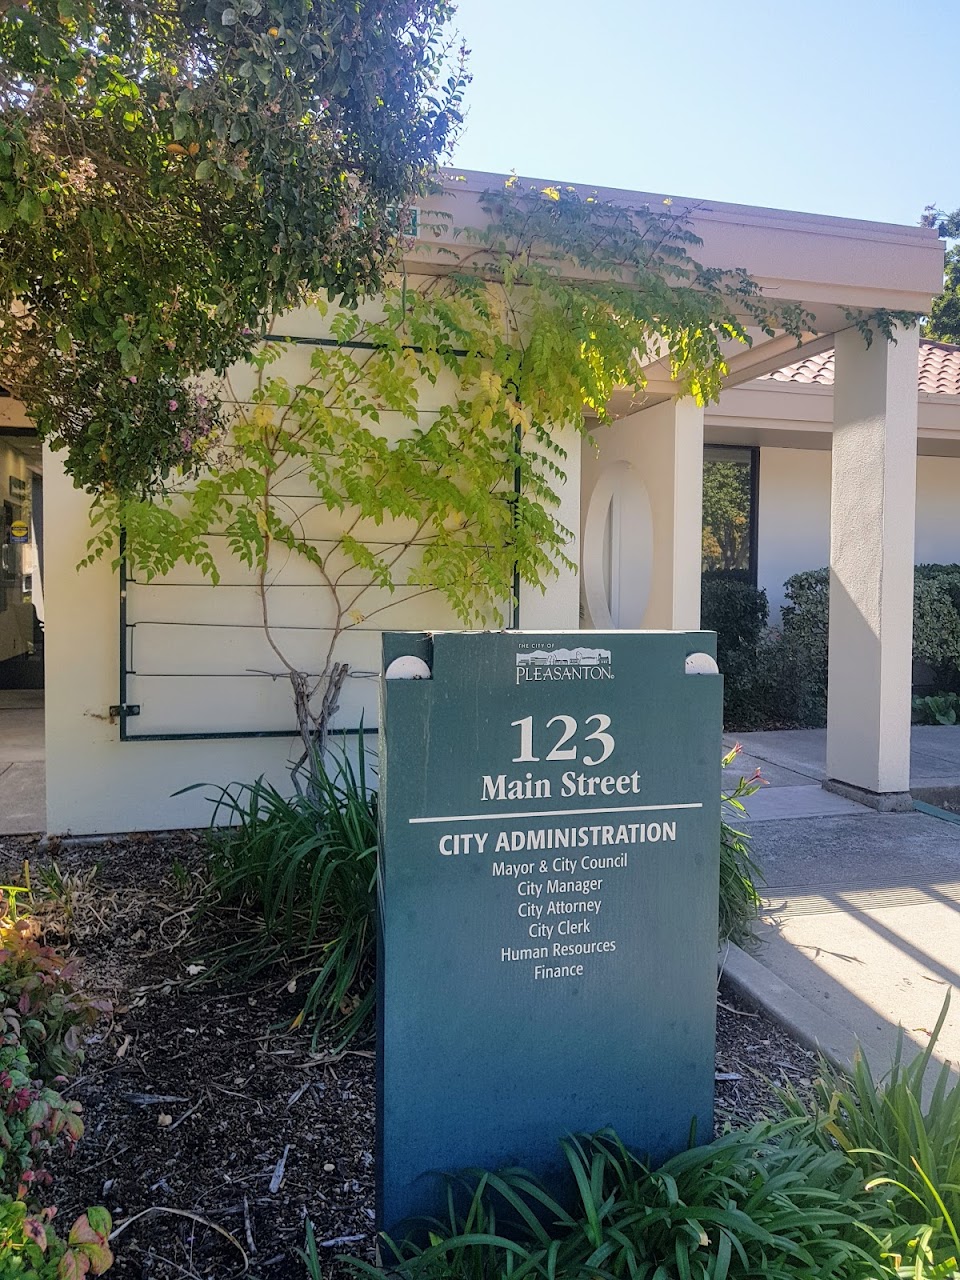 Photo of Housing Authority of the City of Pleasanton. Affordable housing located at 123 MAIN Street PLEASANTON, CA 94566